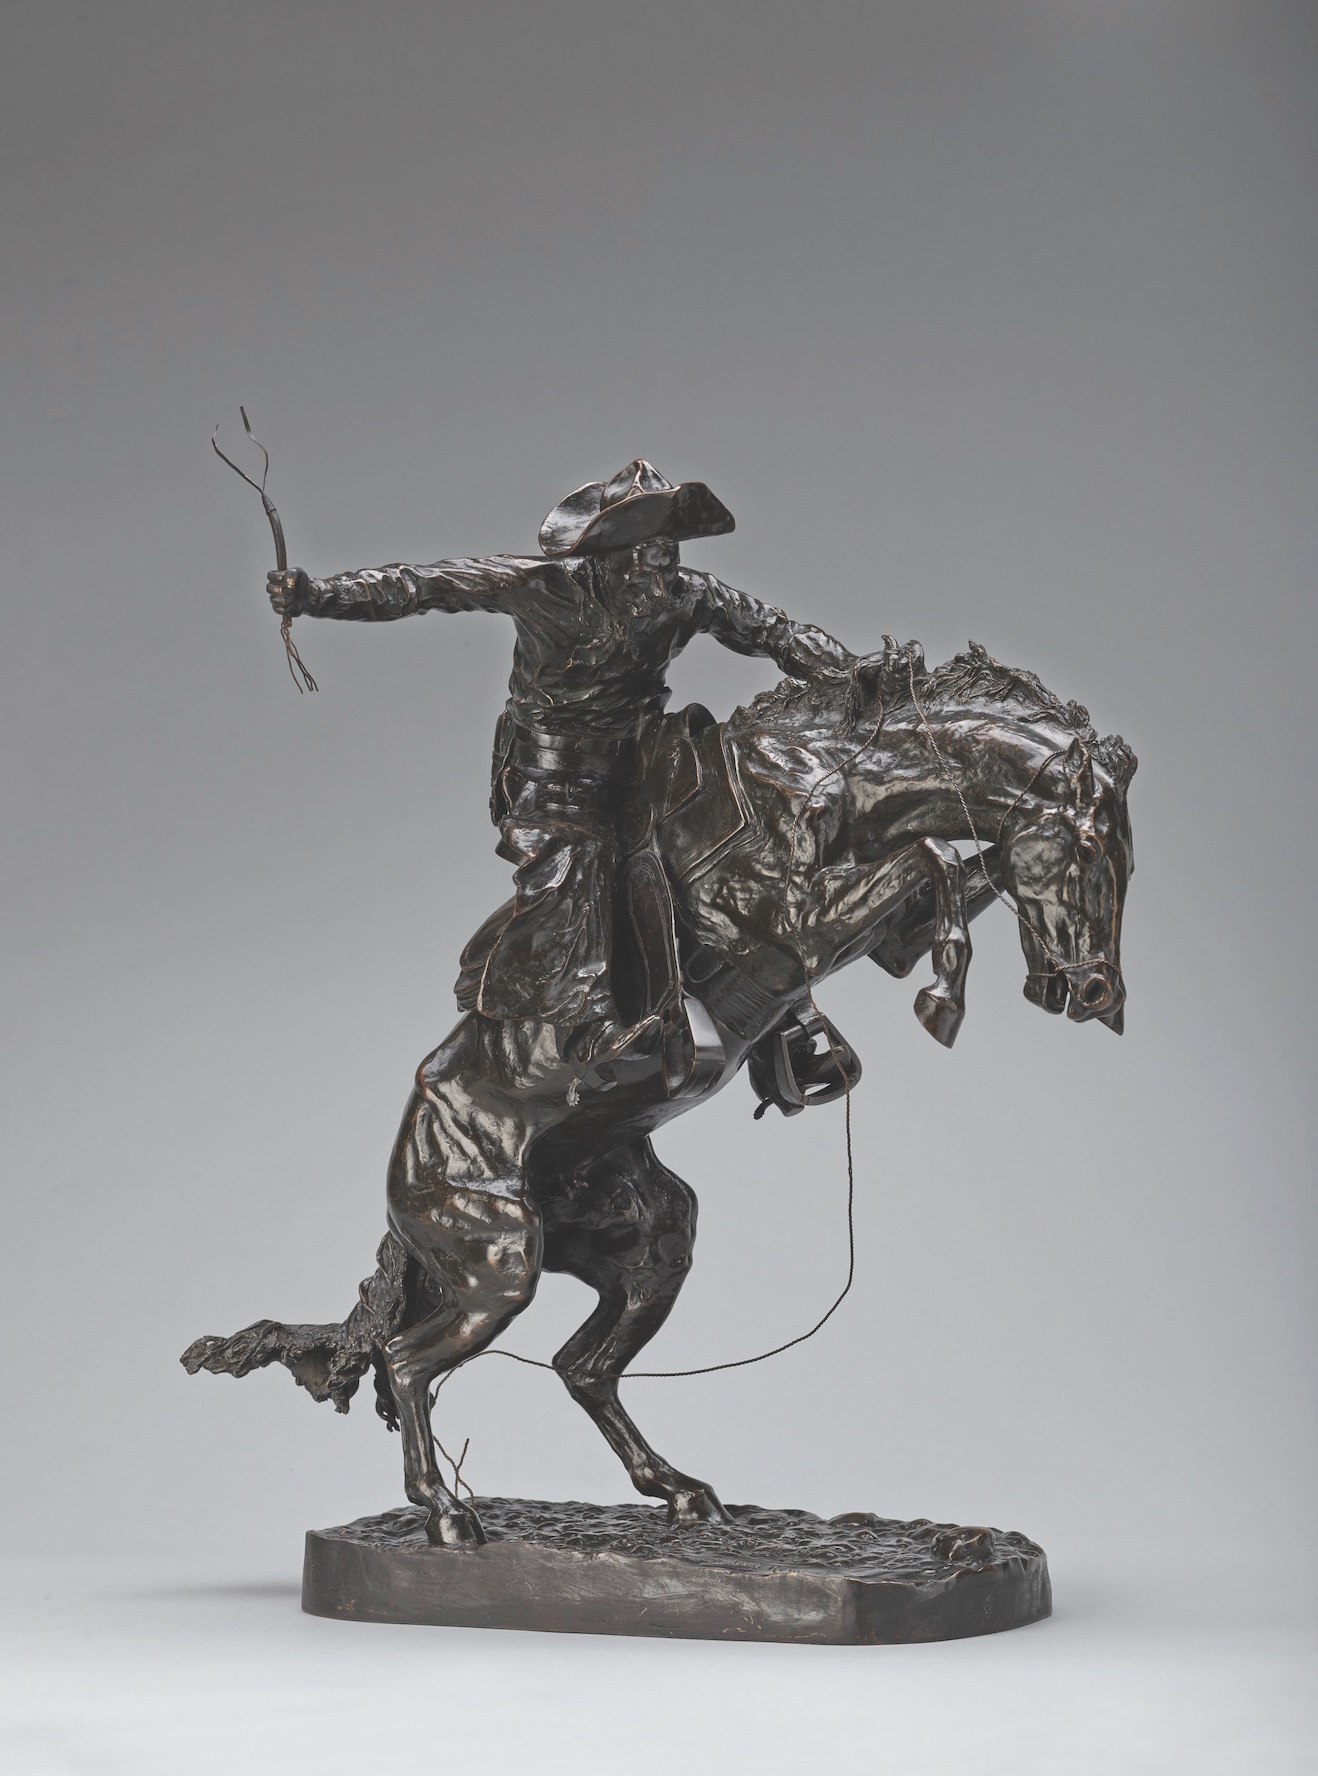 Frederic Remington, The Broncho Buster, modeled 1895 (cast before May 1902). Bronze, Roman Bronze Works, Cast number 12, 23 1/4 x 22 x 13 in.  The Roath Collection, Denver Art Museum, 2013.91.